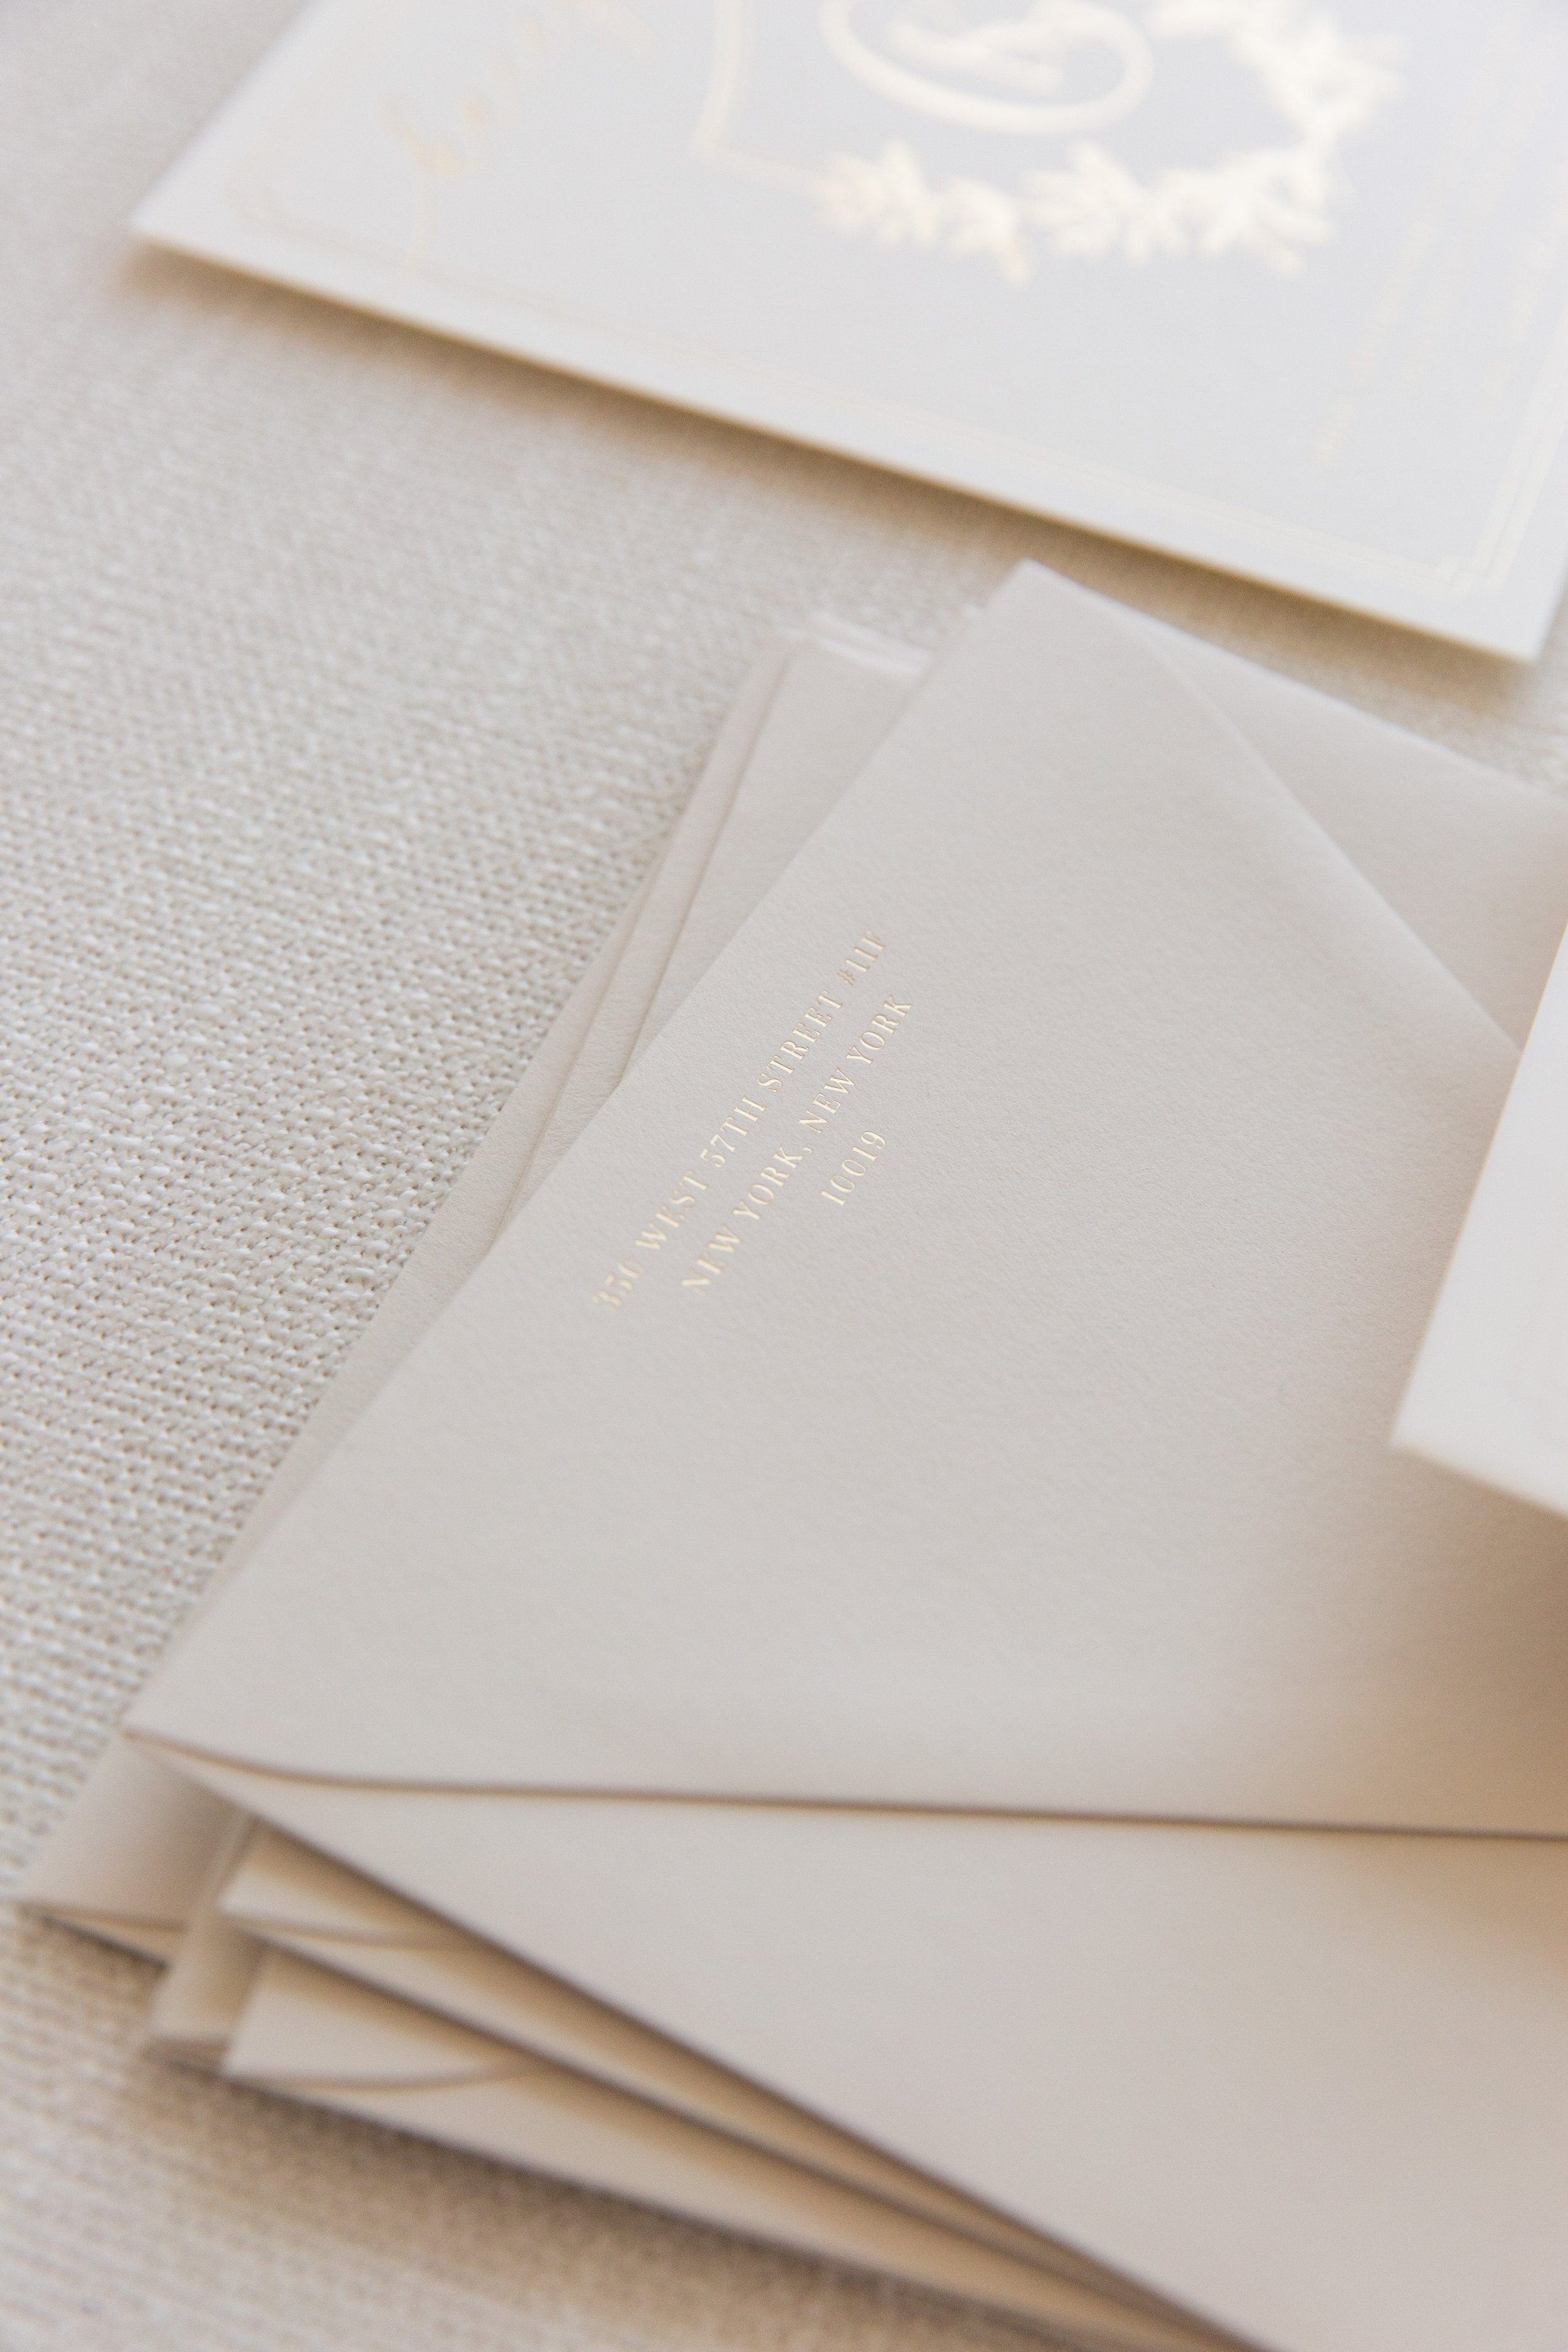 taupe-envelope-gold-foil-return-address-classic-timeless-wedding-invitation-collection-champagne-and-ink-newport-ri-erin-mcginn-photography-original.jpg